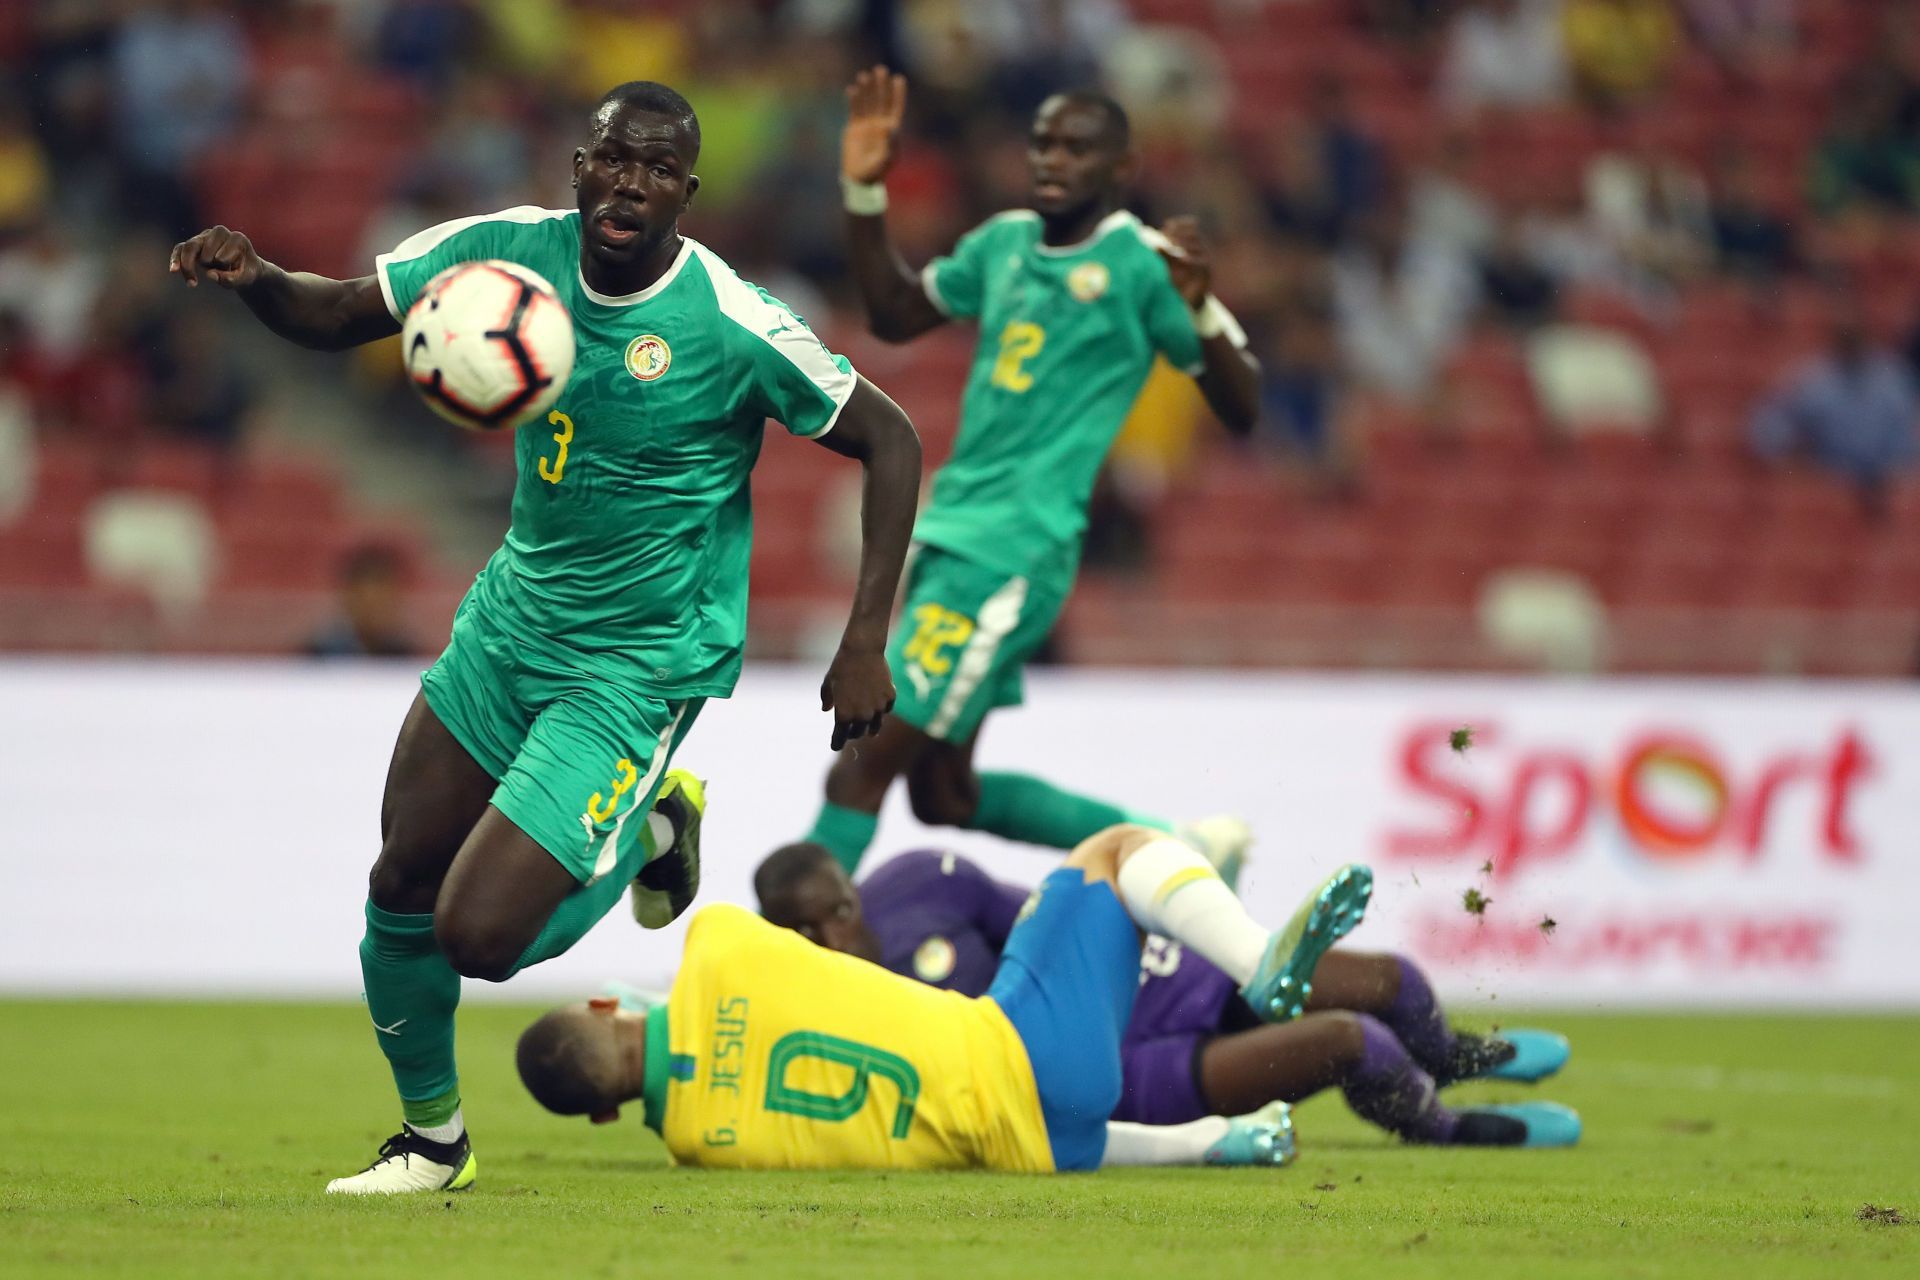 Koulibaly is the current captain of Senegal